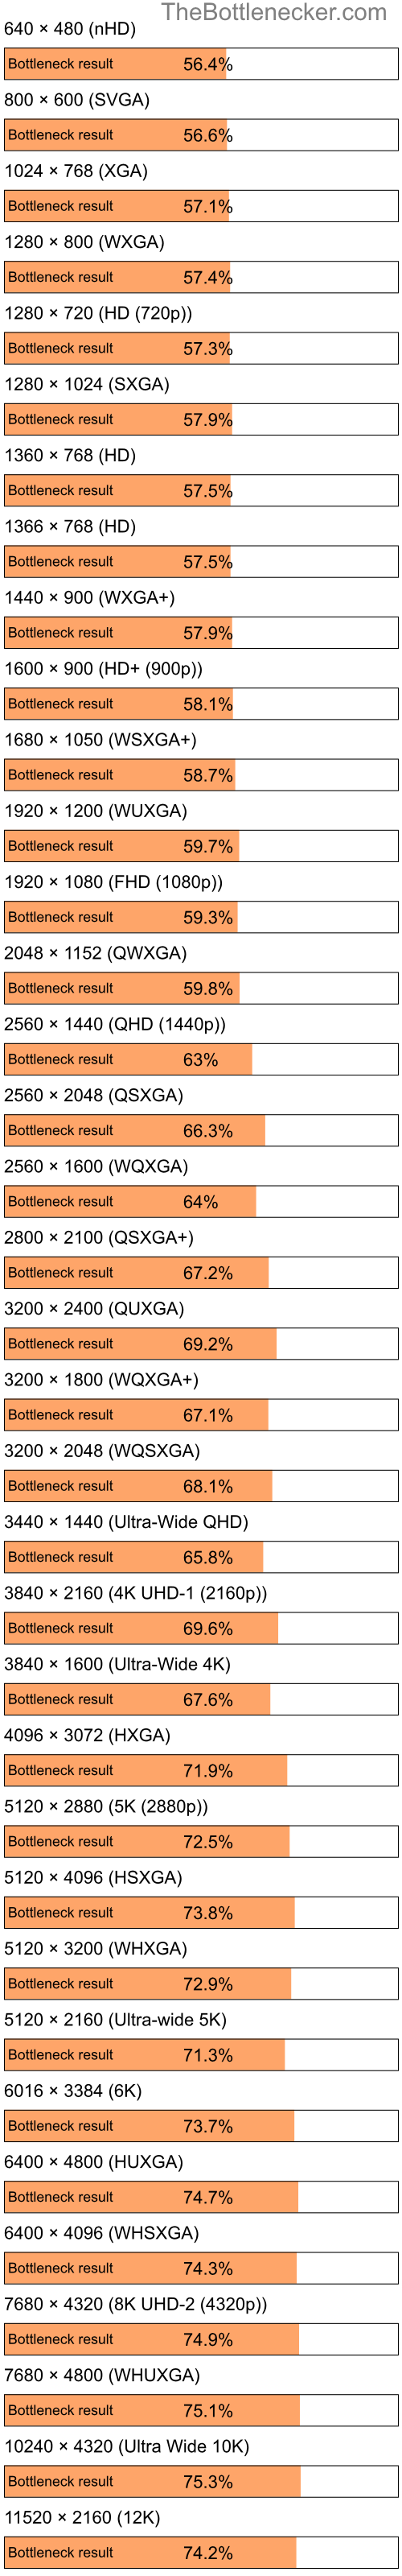 Bottleneck results by resolution for Intel Pentium 4 and NVIDIA GeForce 9300M G in Processor Intense Tasks